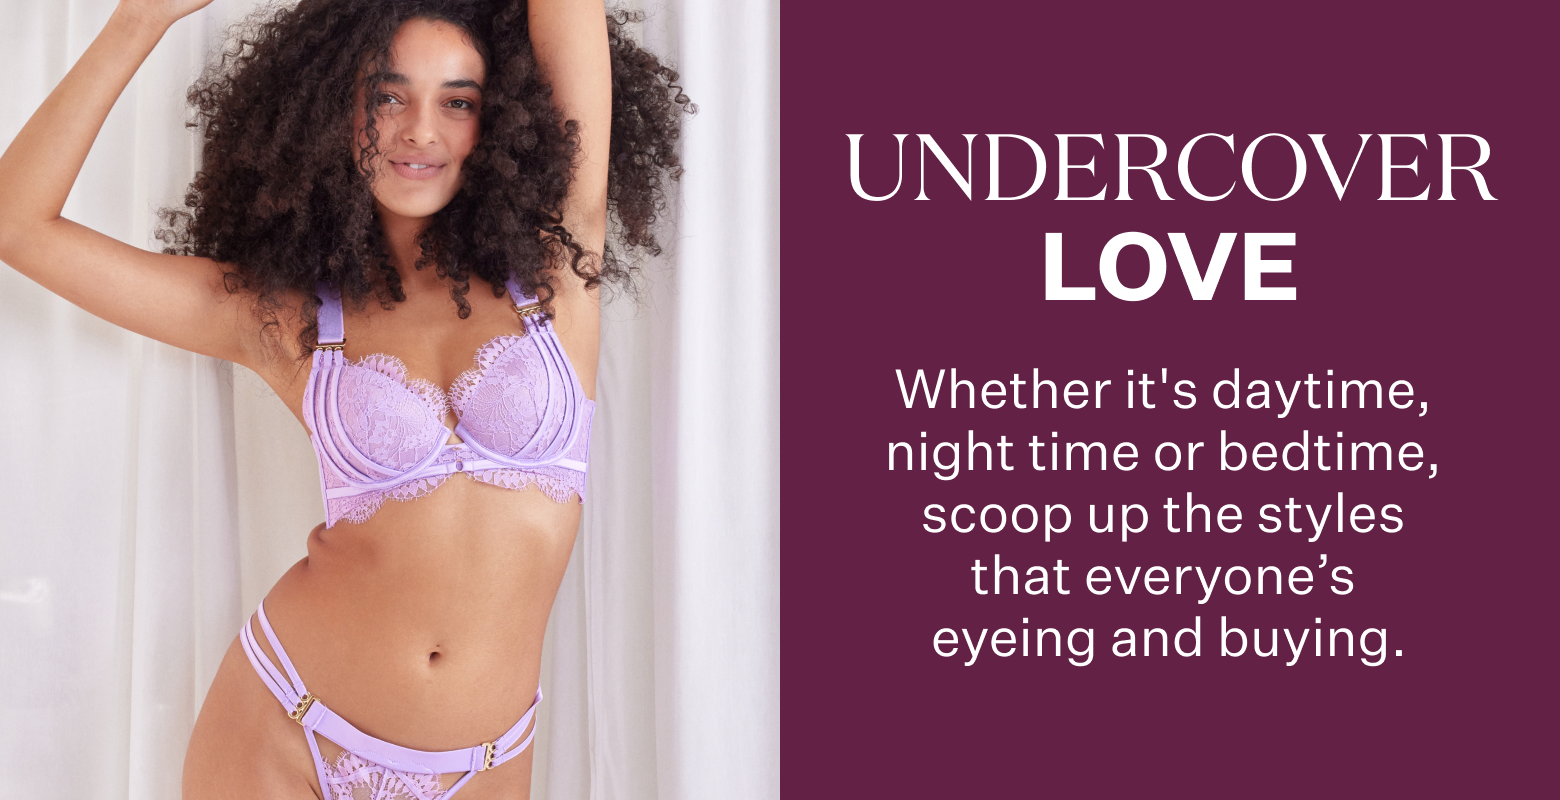 Undercover Love. Whether it's daytime, night time or bedtime, scoop up the styles that everyone's eyeing and buying.